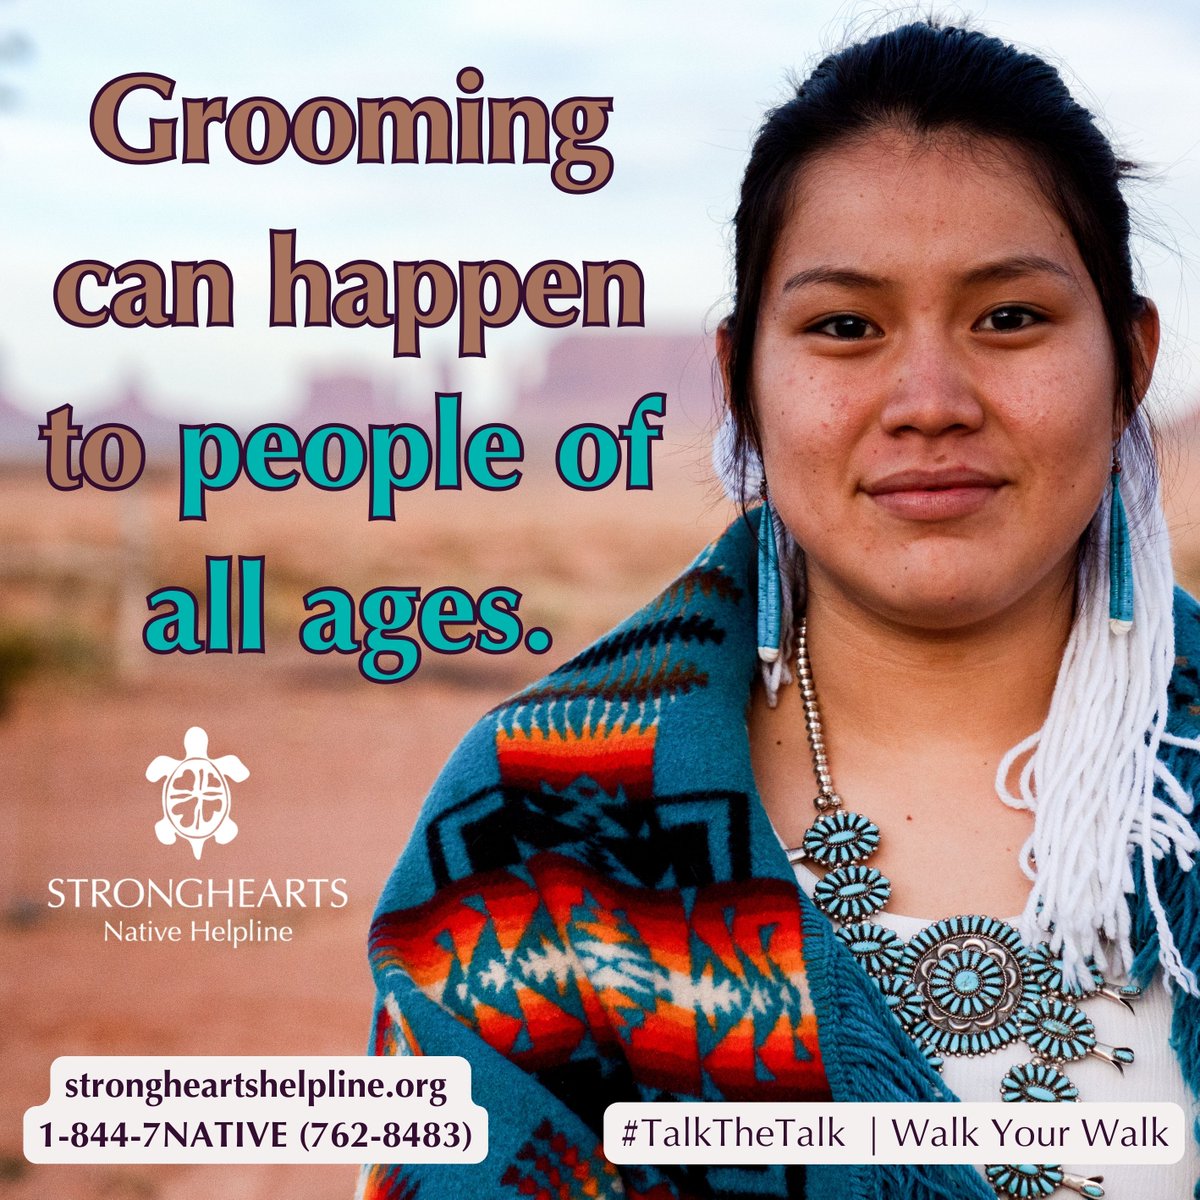 One common tool perpetrators of sexual assault use is grooming. While these tactics are used most often against younger kids, teens and vulnerable adults are also at risk. Learn more at bit.ly/3VaissR strongheartshelpline.org 1-844-7NATIVE (762-8483) #TalkTheTalk